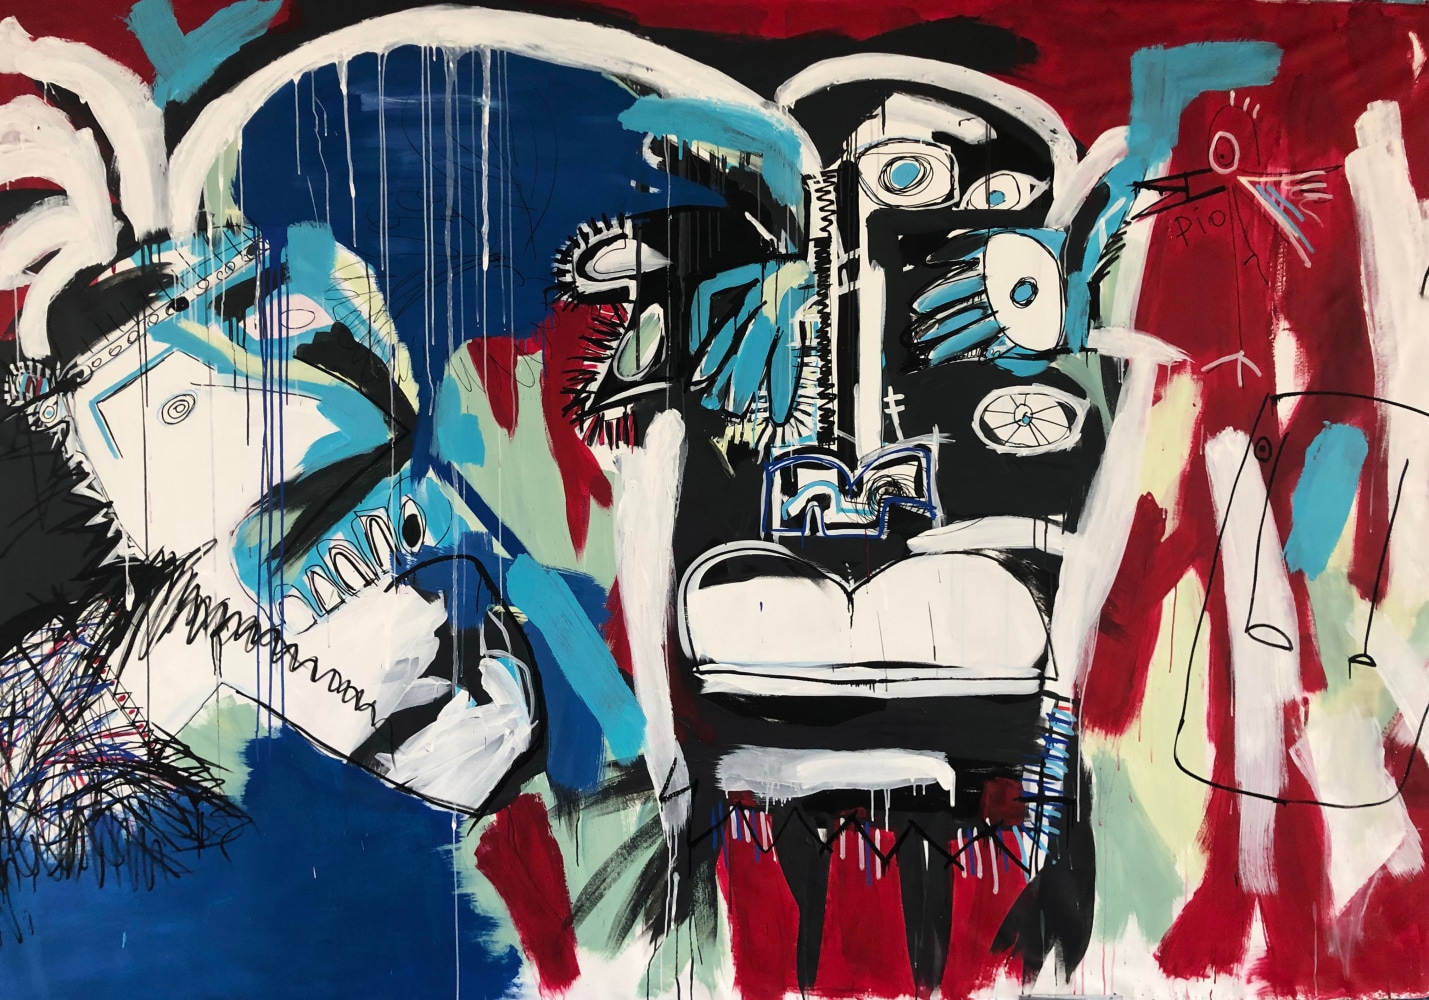 Fernanda Lavera, Final Cut, 2019, 79 x 126 inches, Acrylic, Marker and Oil on canvas, Graffiti and Street Art for Sale at Manolis Projects Art Gallery